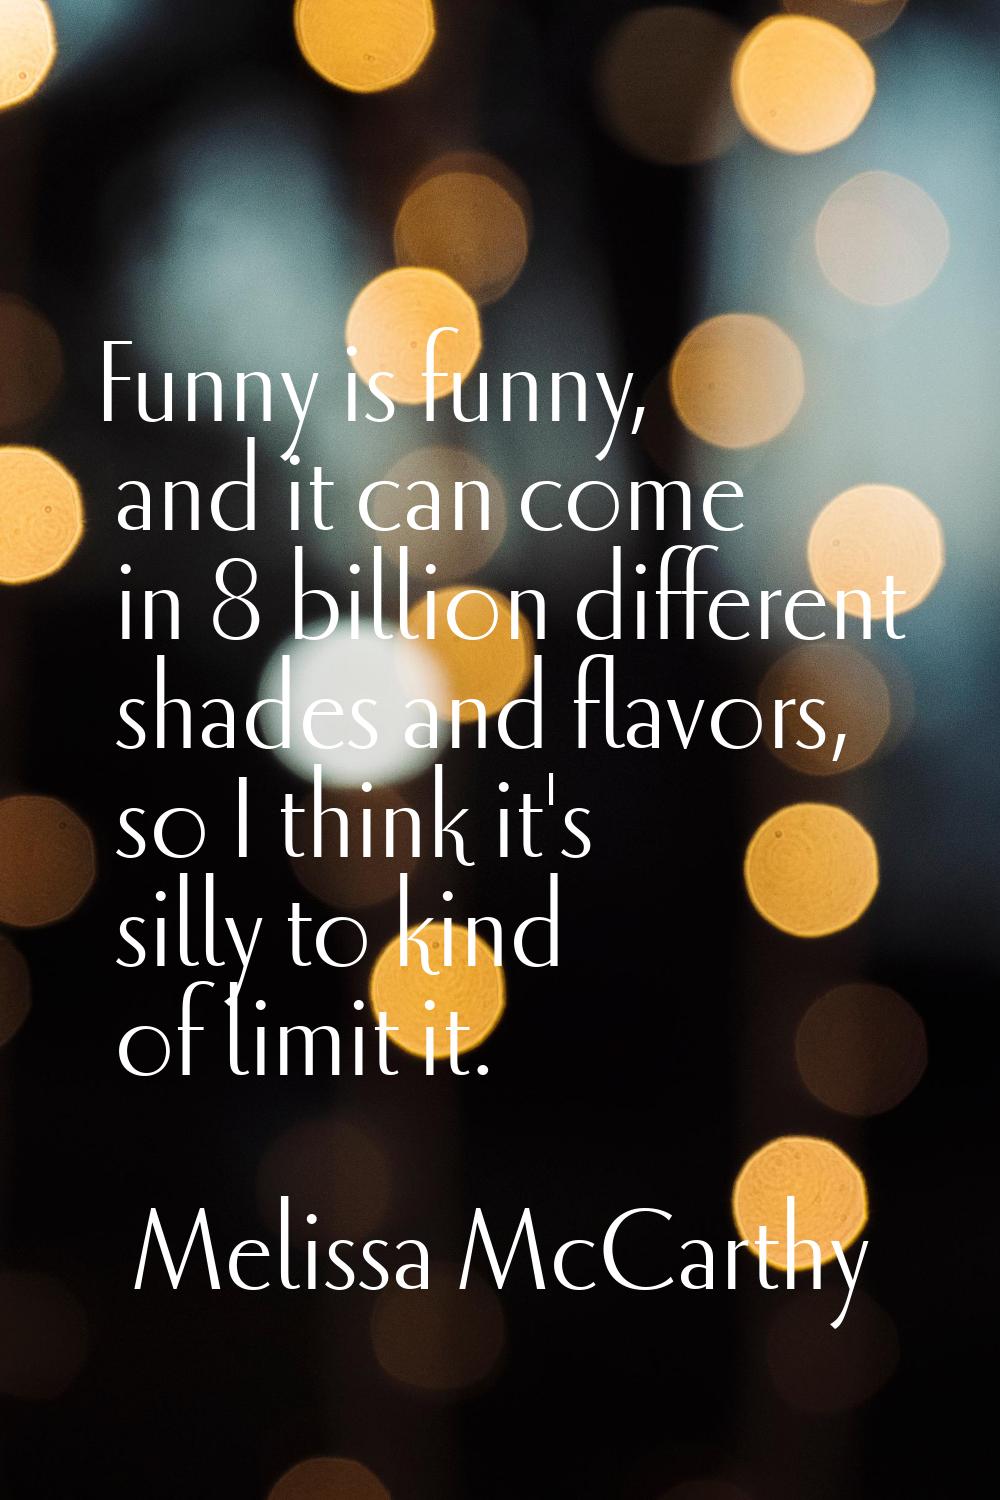 Funny is funny, and it can come in 8 billion different shades and flavors, so I think it's silly to